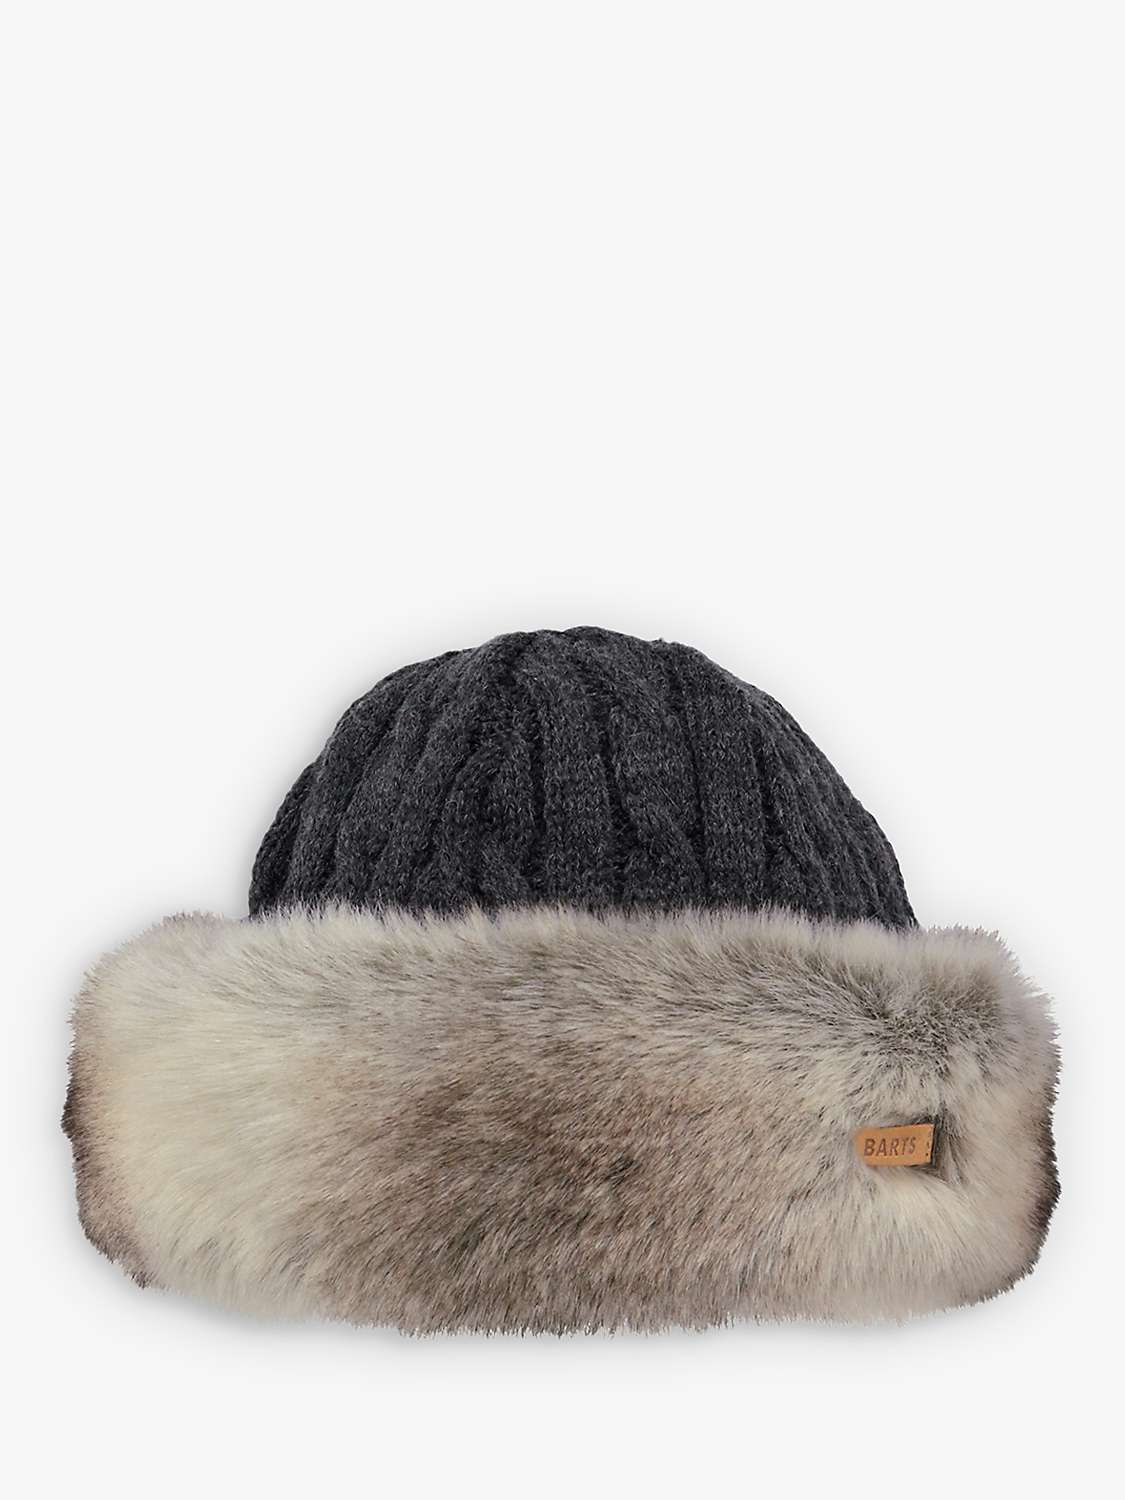 Buy Barts Faux Fur Cable Bandhat, One Size Online at johnlewis.com